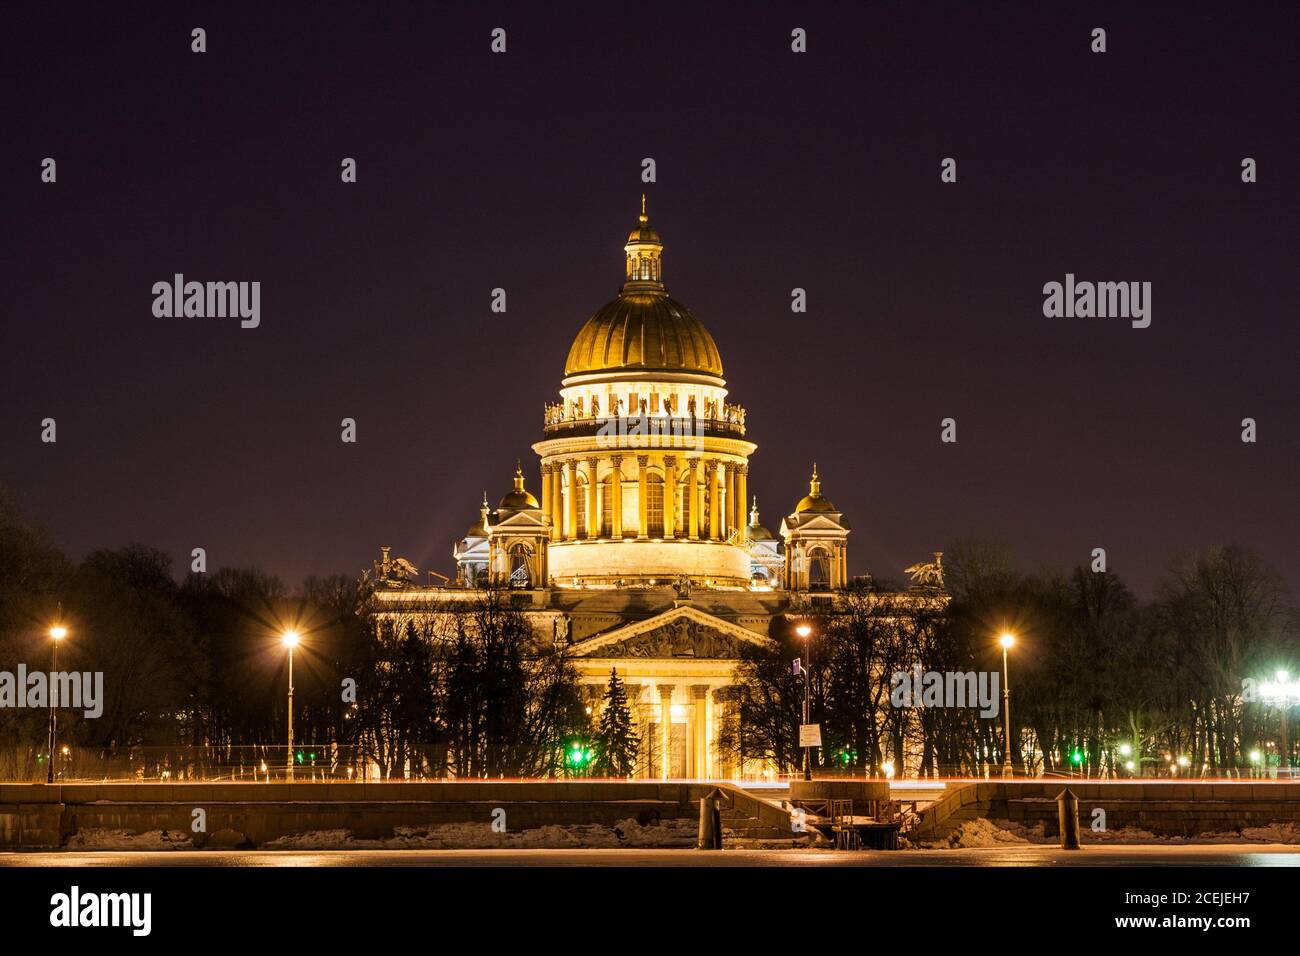 St. Isaac's Cathedral. Saint Petersburg winter night Stock Photo